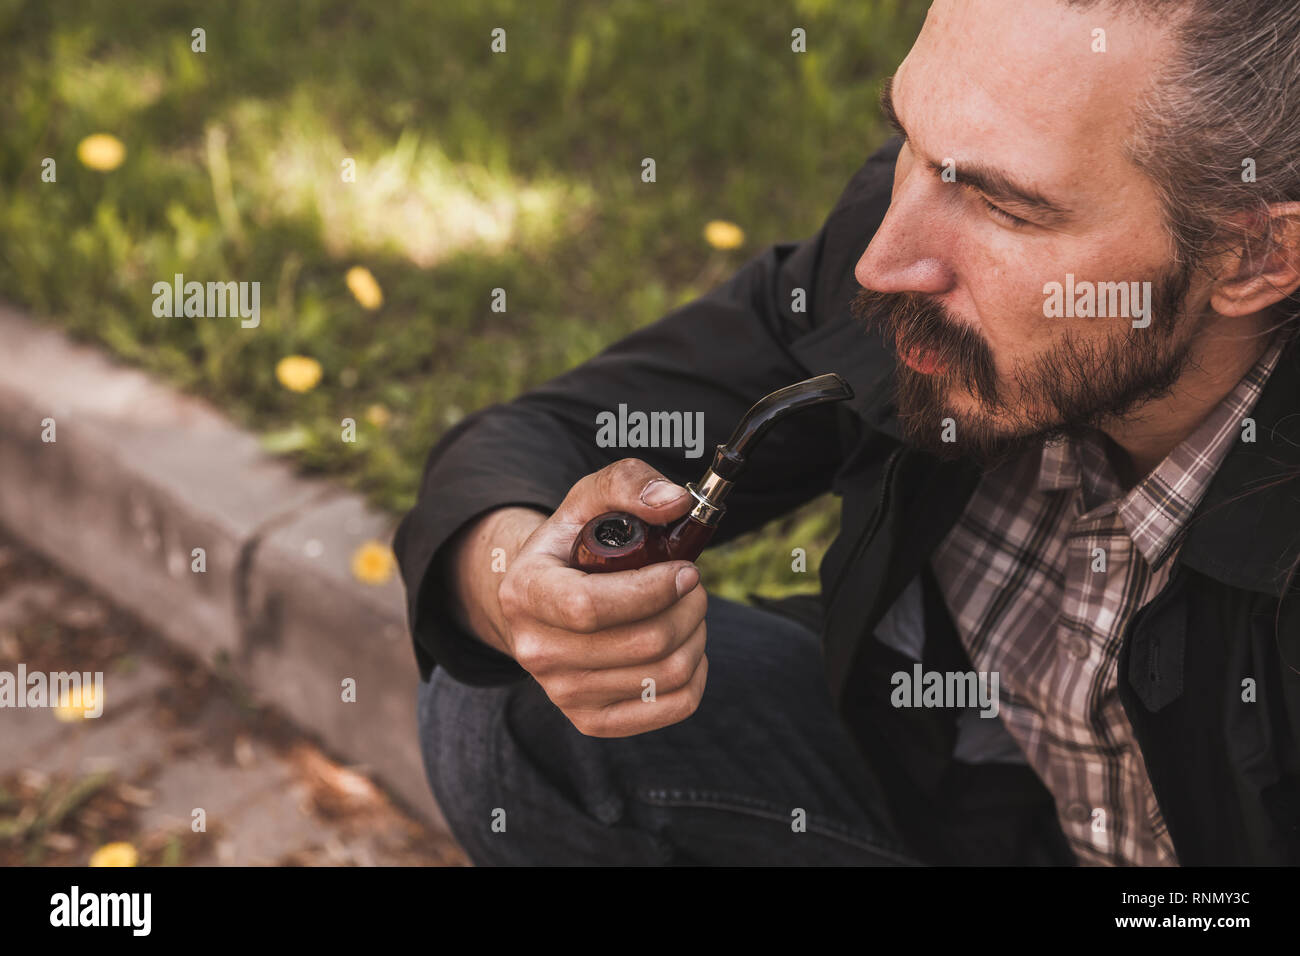 Bearded man smoking pipe in summer park, close up portrait Stock Photo